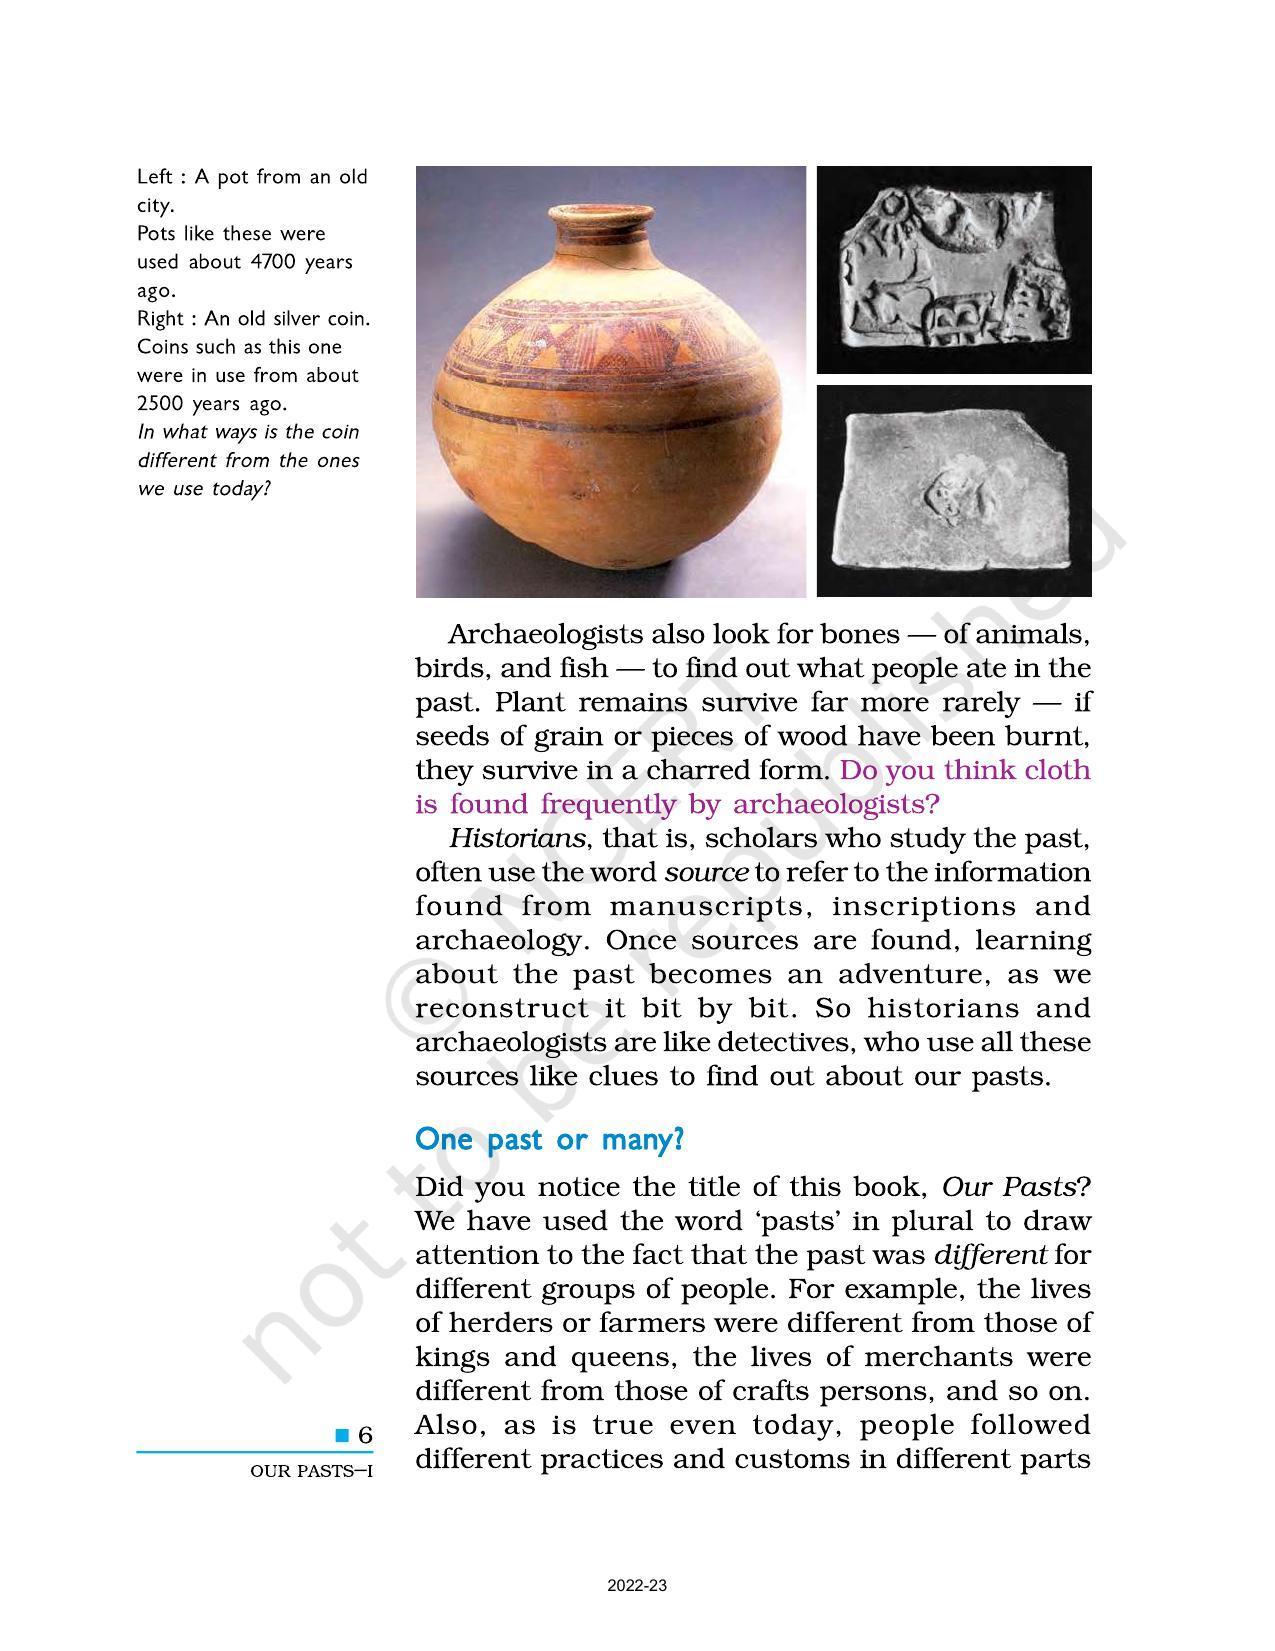 NCERT Book for Class 6 History (Social Science) : Chapter 1-What Where, How, and When? - Page 6